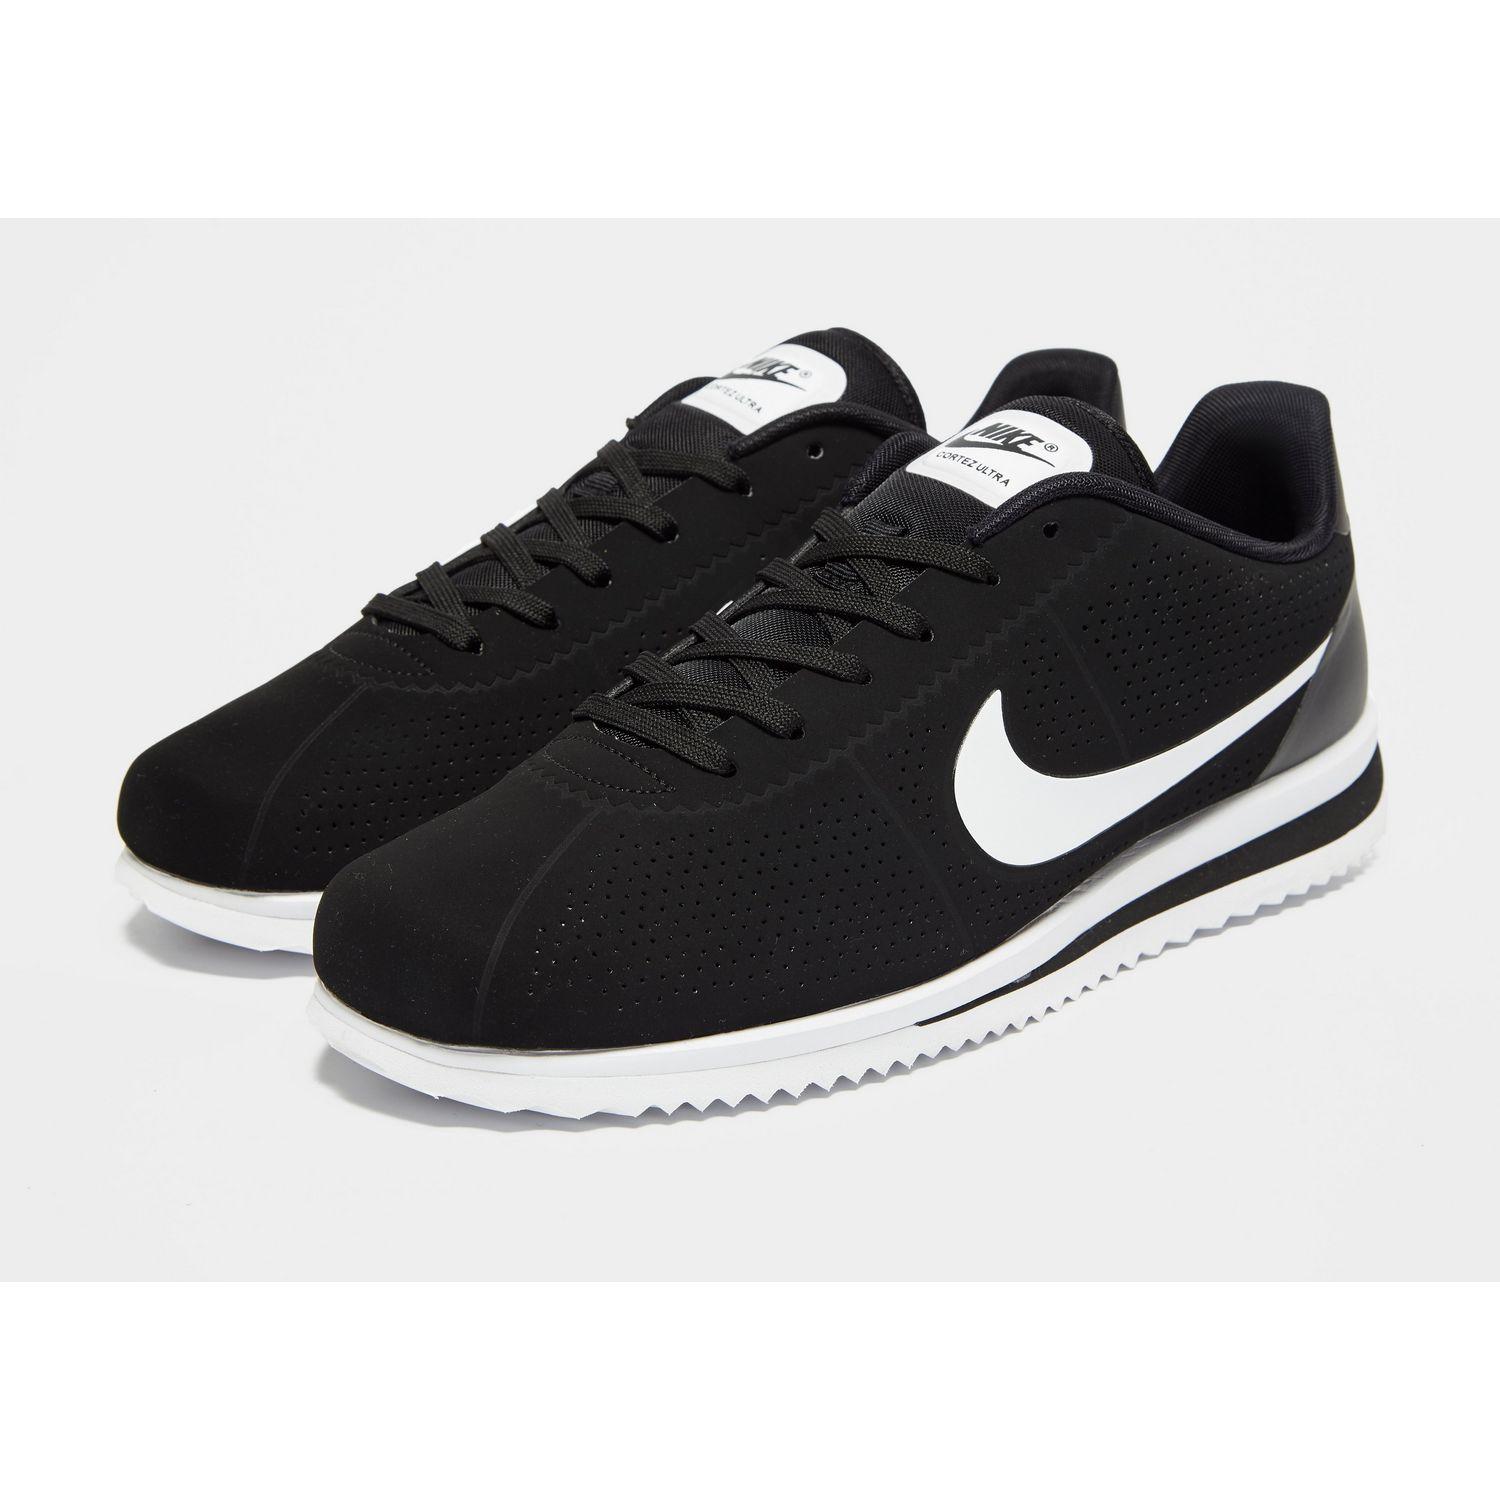 Nike Synthetic Cortez Ultra Moire Track & Field Shoes in Black for